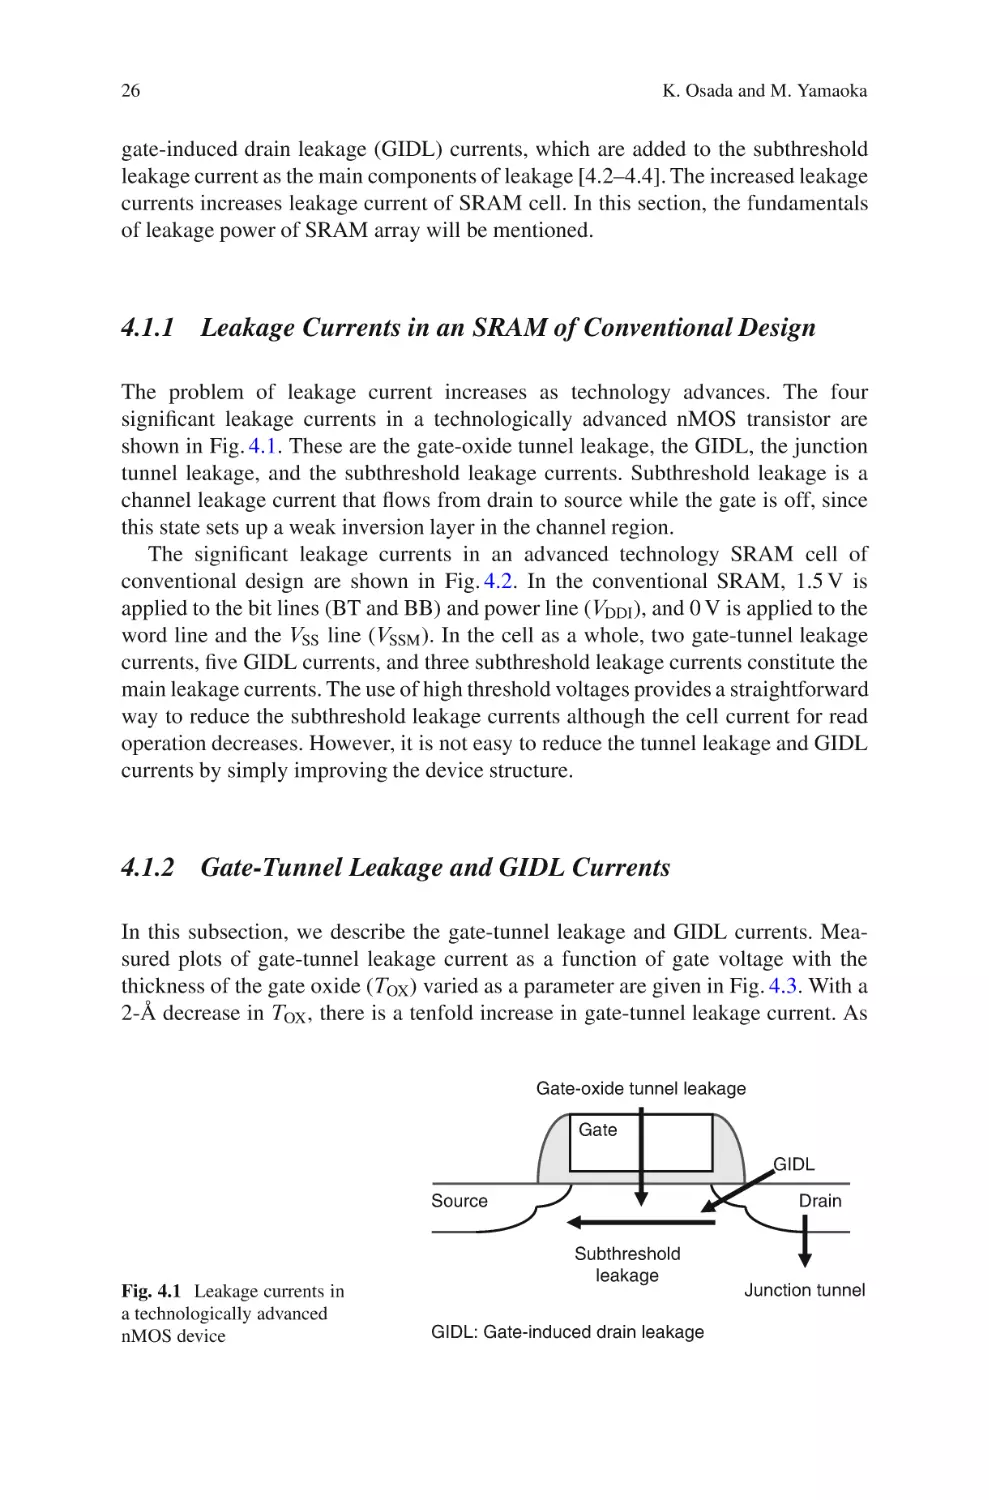 4.1.1 Leakage Currents in an SRAM of Conventional Design
4.1.2 Gate-Tunnel Leakage and GIDL Currents